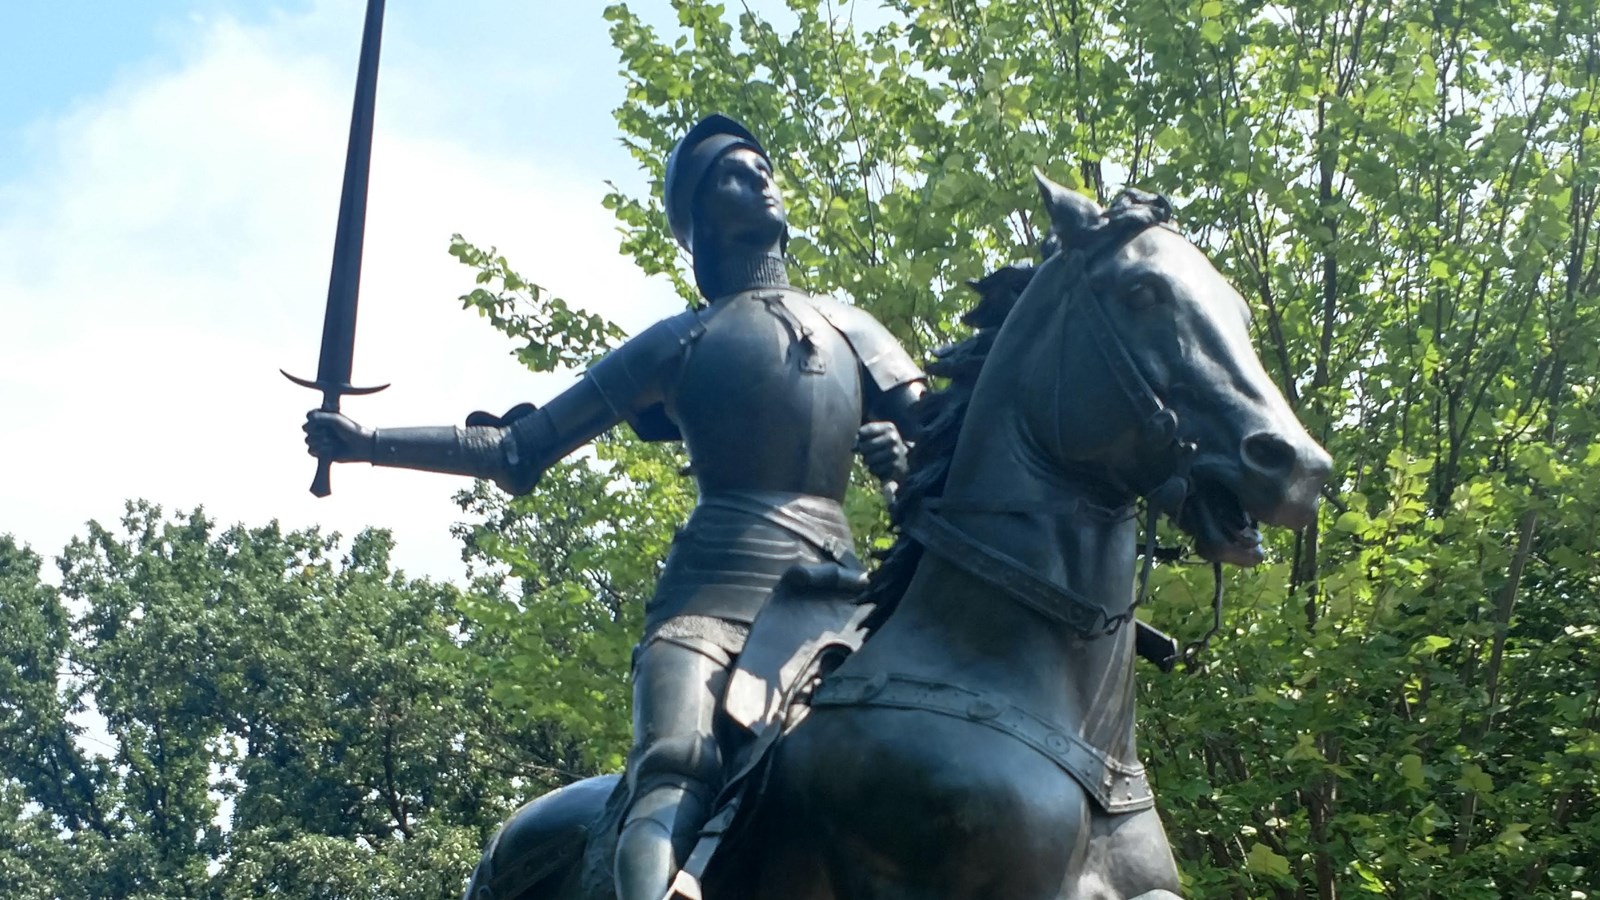 A bronze statue of Joan of Arc riding a horse, holding up a sword towards the sky